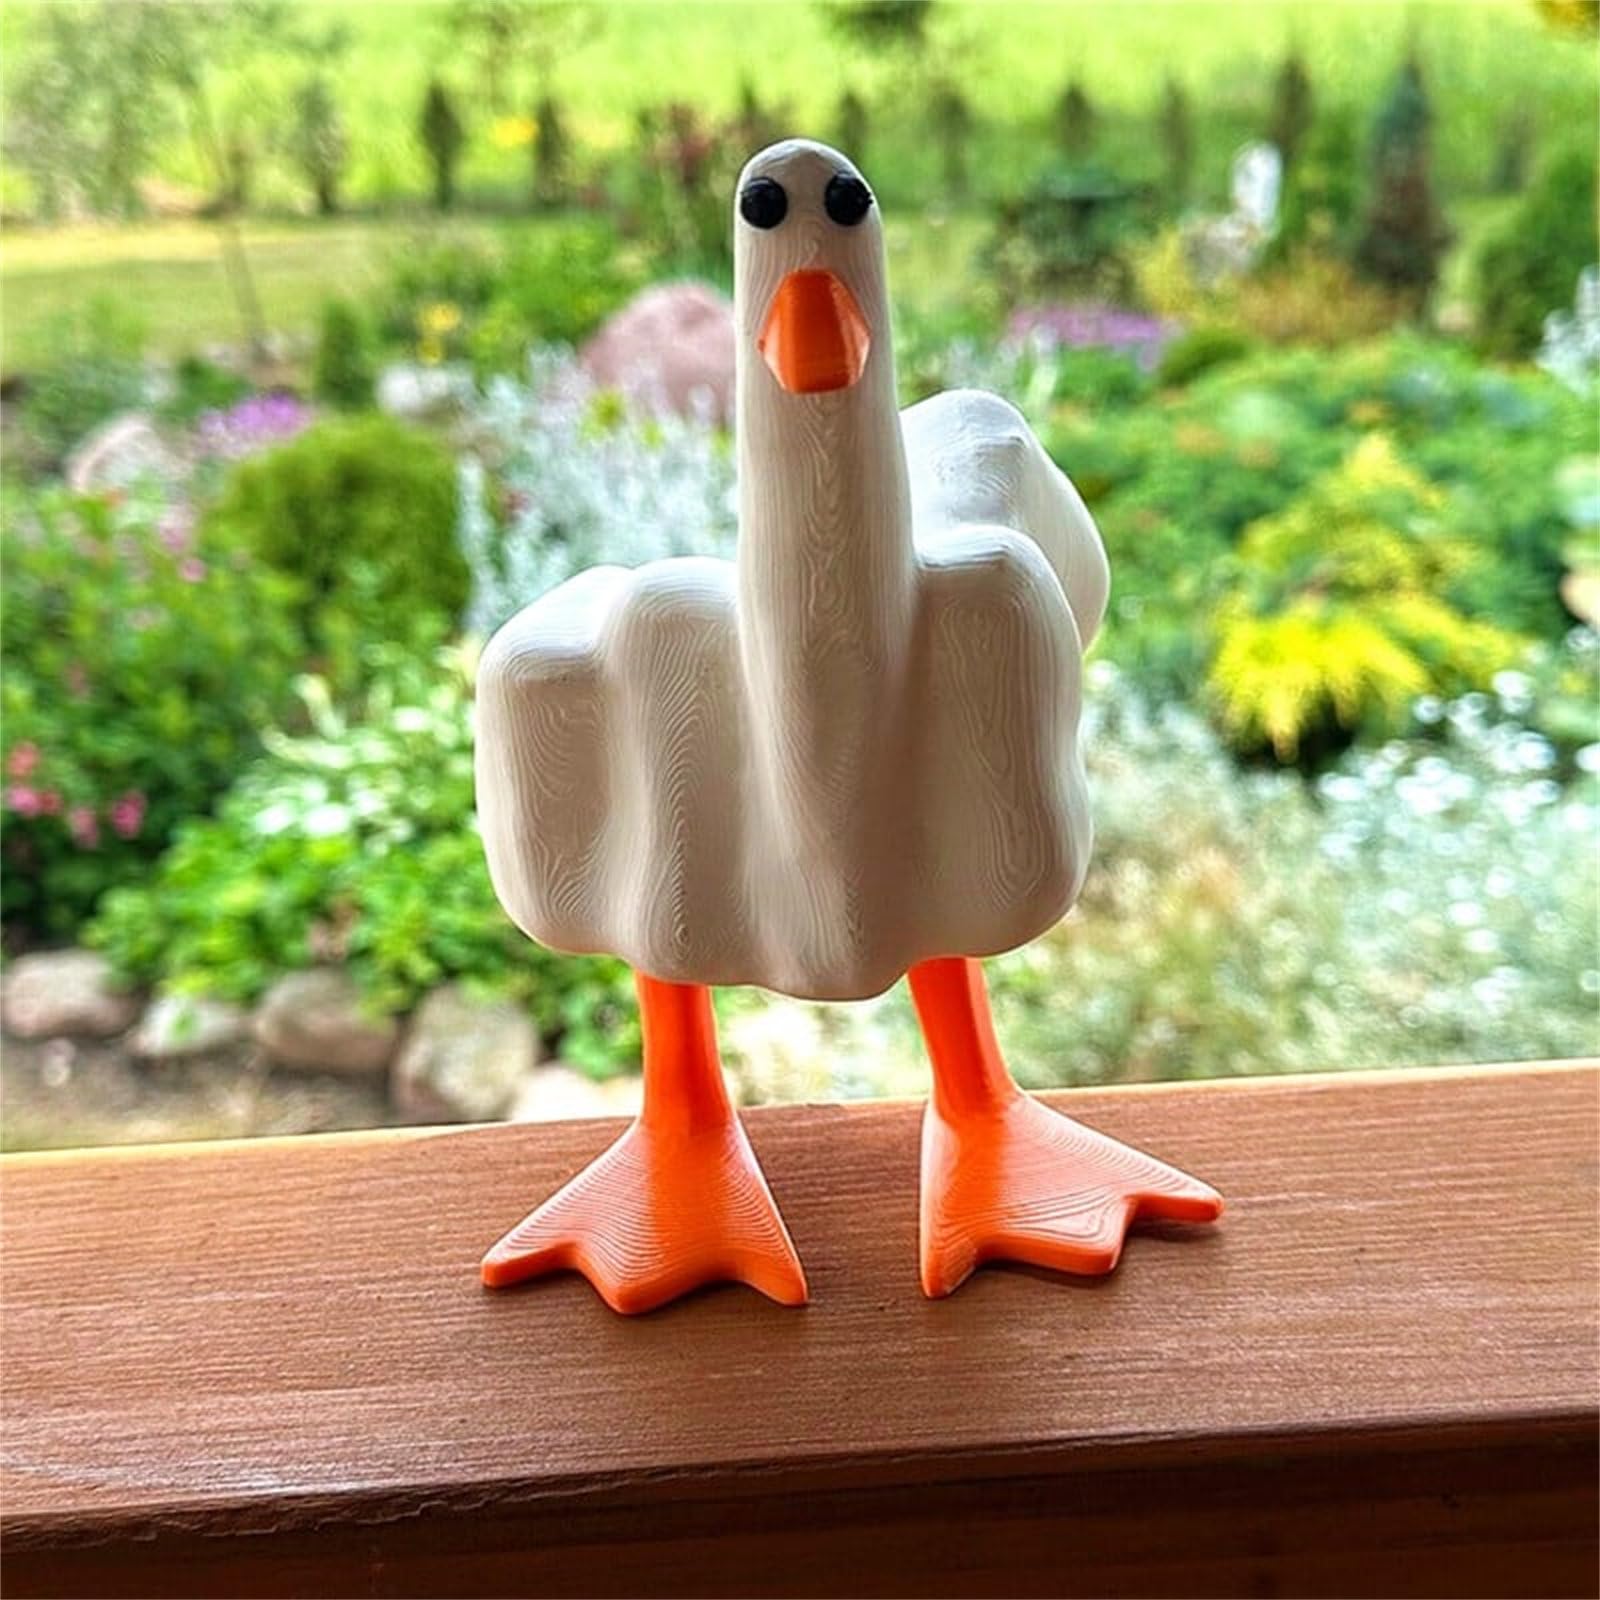 🎉2023 new product promotion 50% OFF-🎁Middle finger duck-The Duck You-EchoDecor